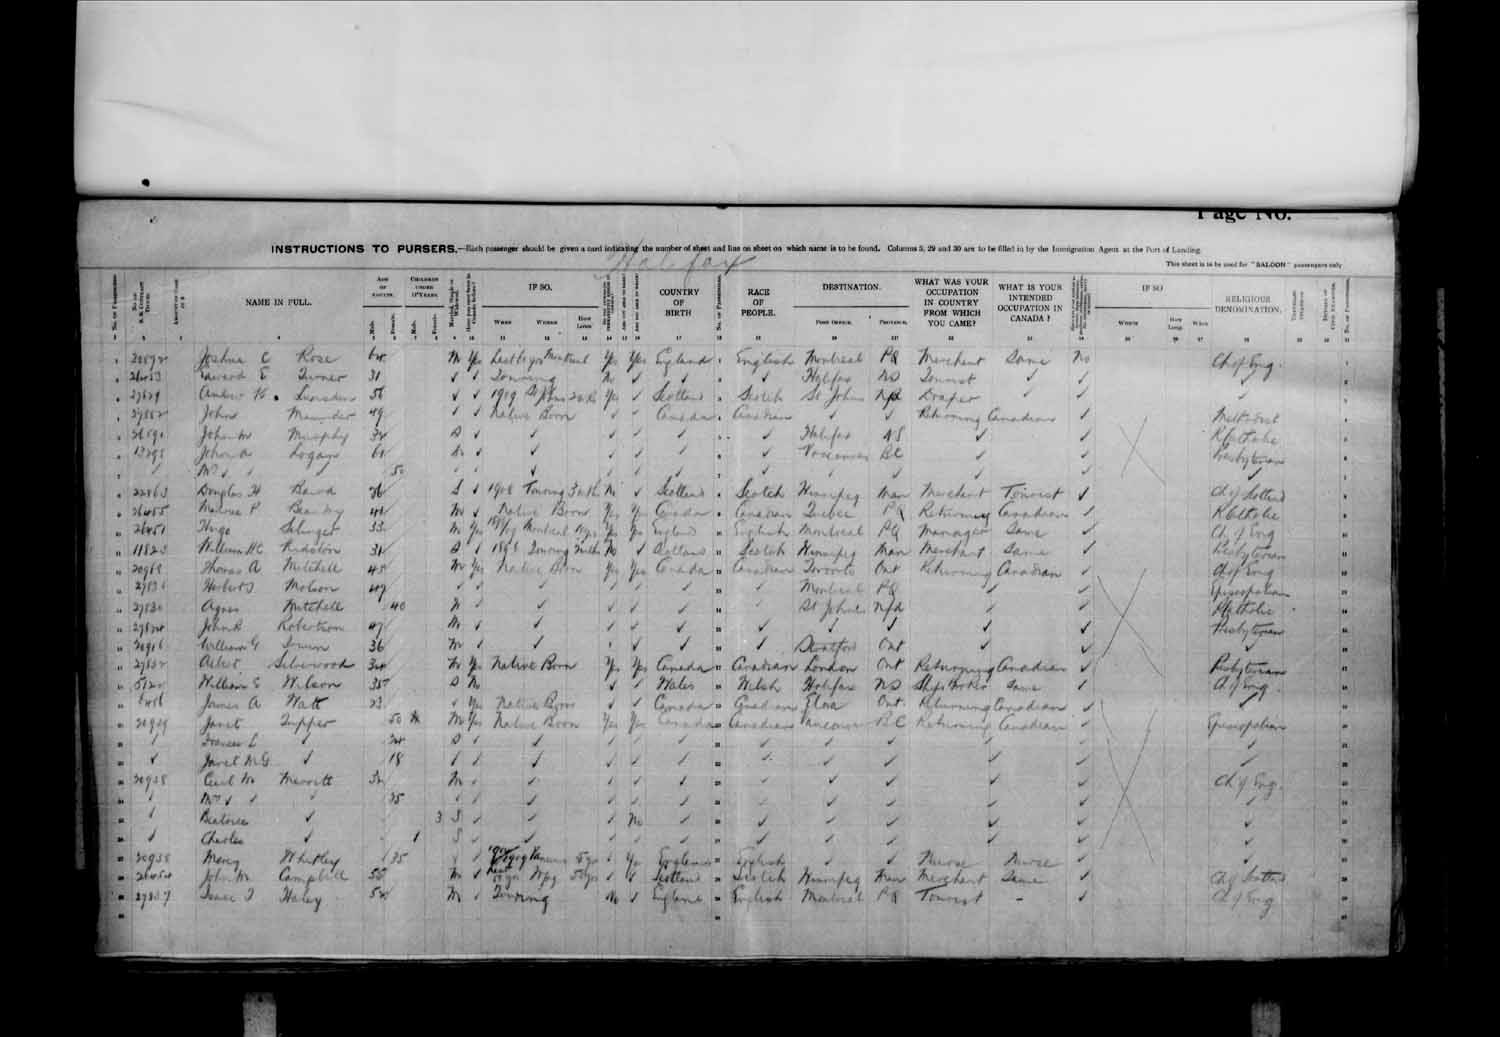 Digitized page of Quebec Passenger Lists for Image No.: e003684040